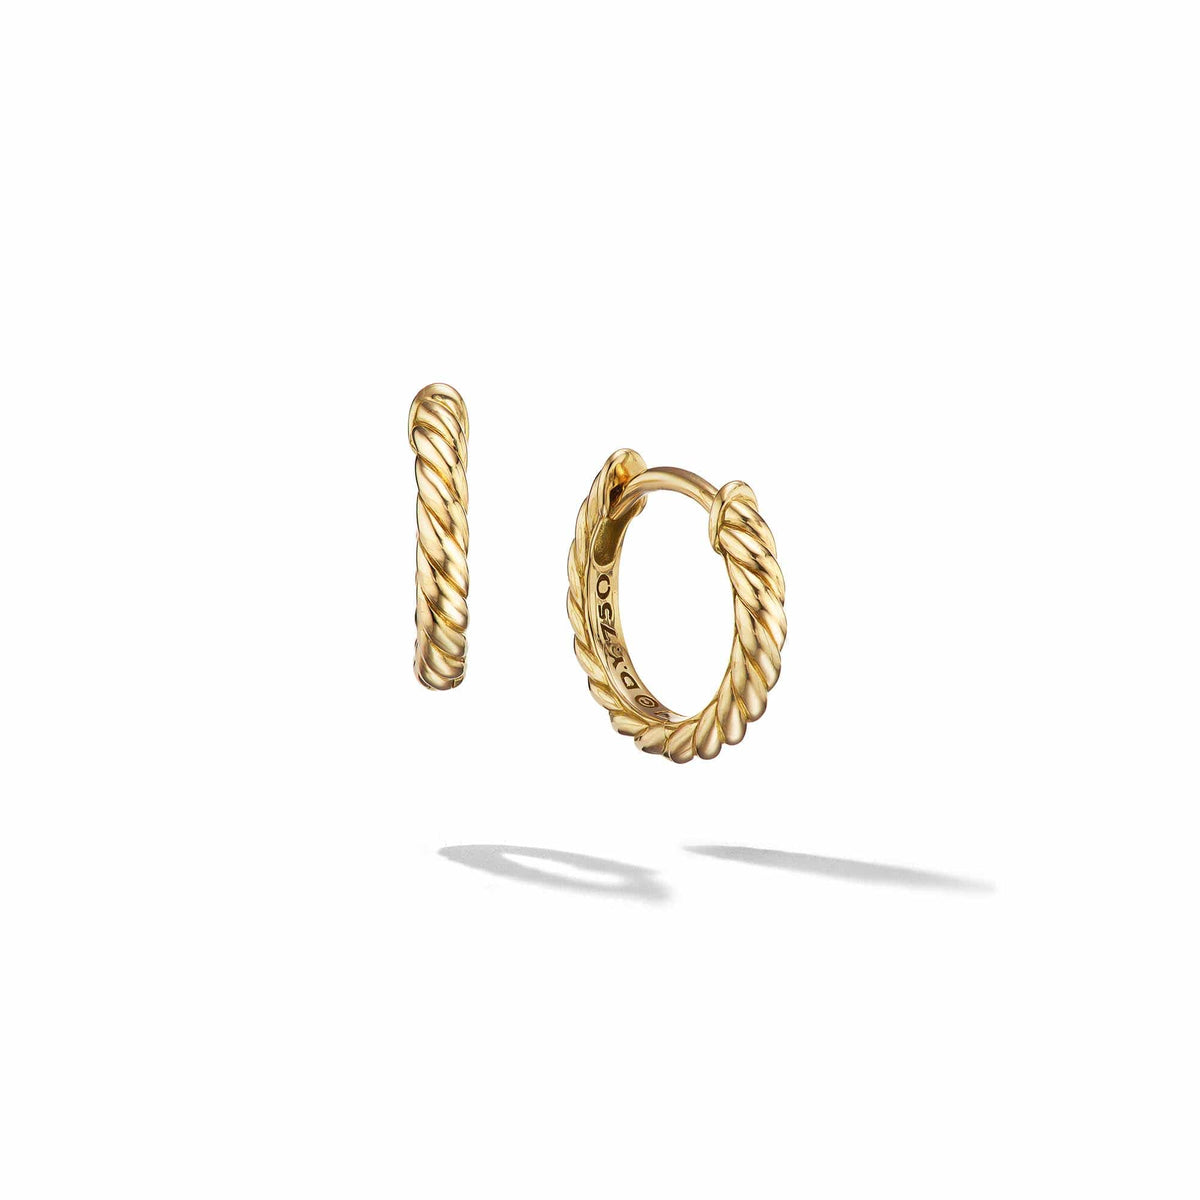 Sculpted Cable Huggie Hoop Earrings in 18K Yellow Gold, Long's Jewelers